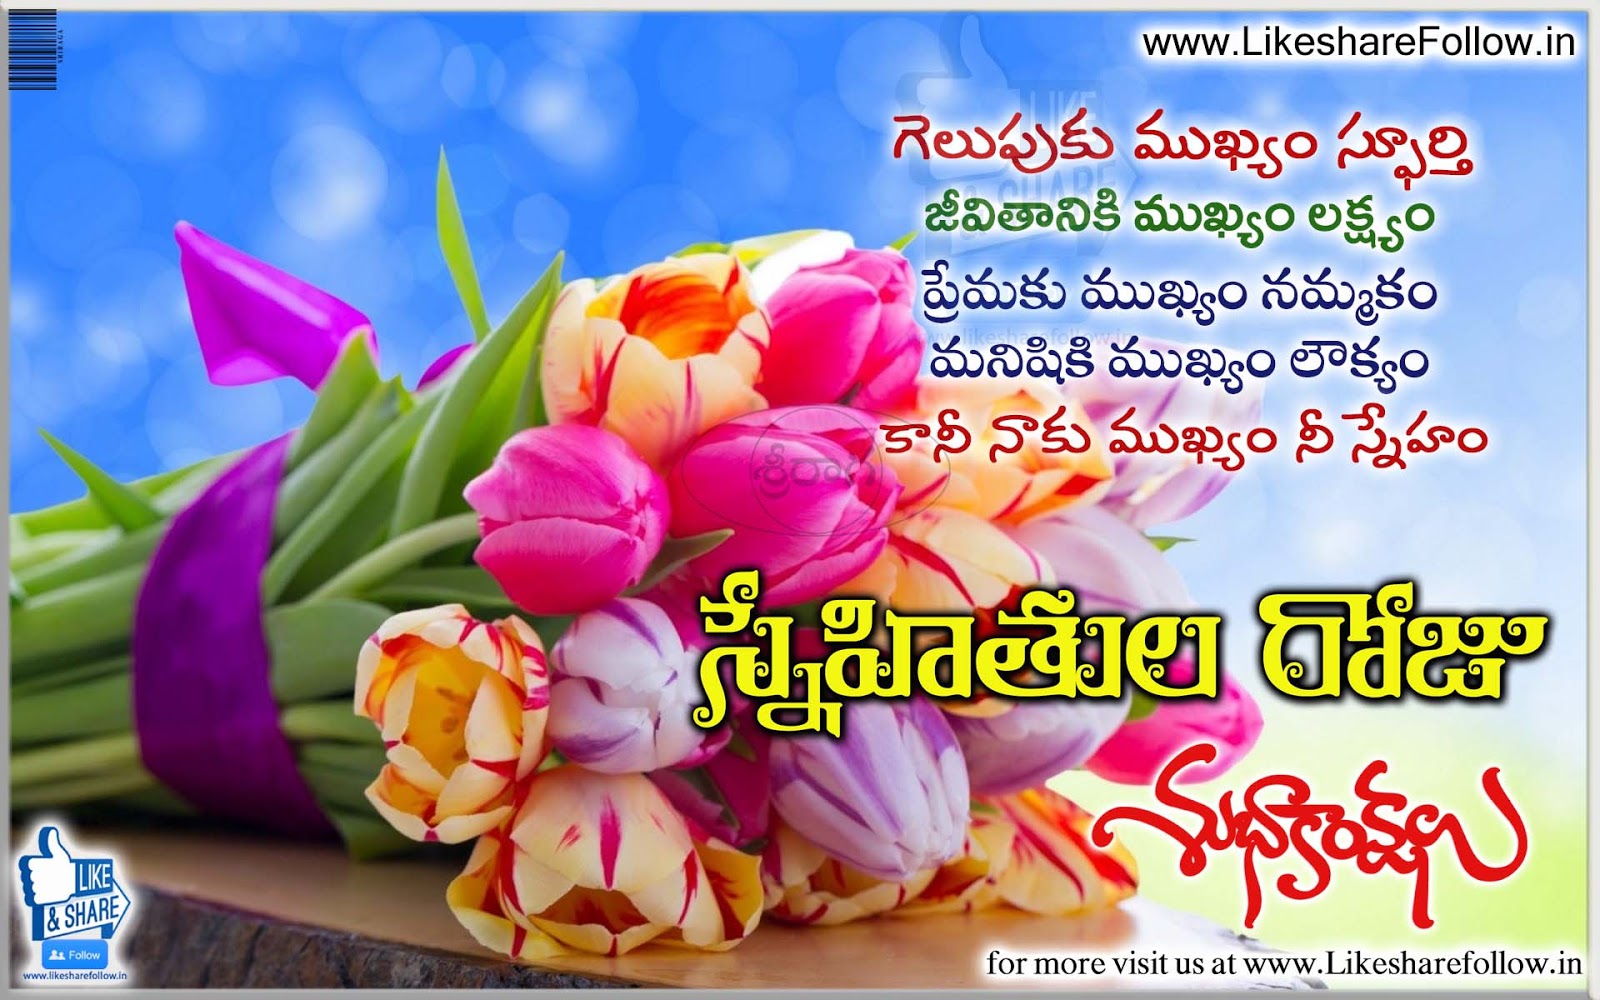 Friendship Day Telugu online greetings wishes sms | Like Share Follow